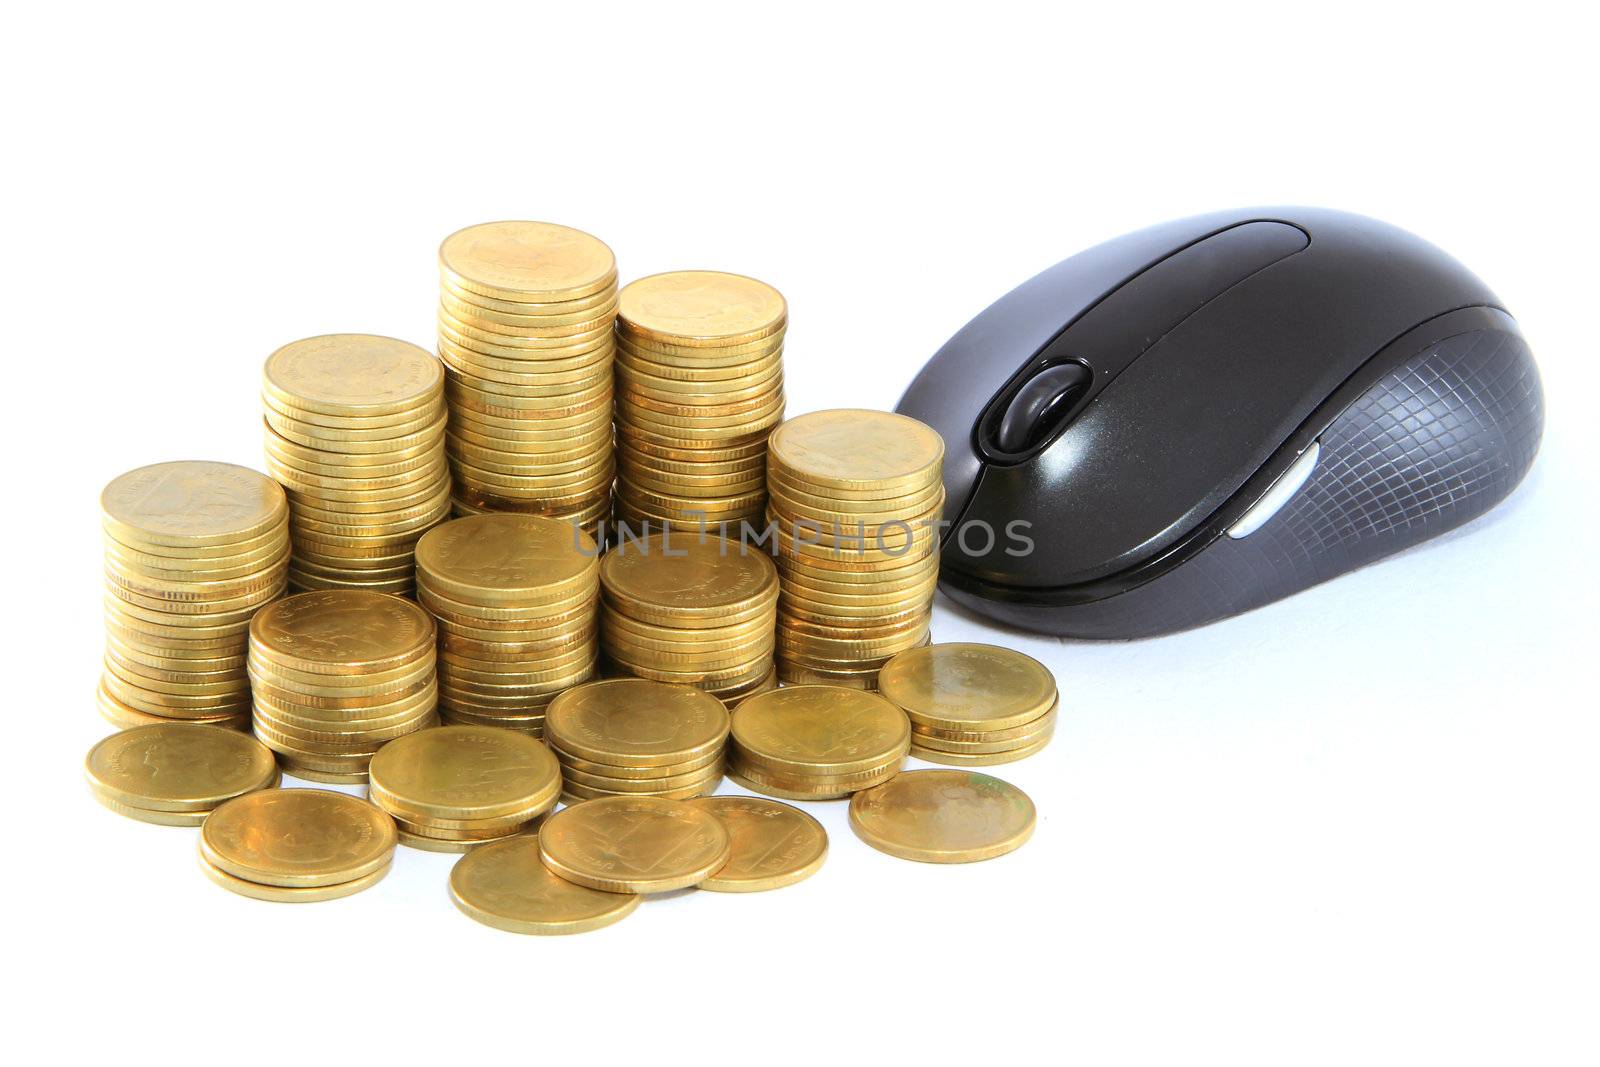 black computer mouse and golden coin